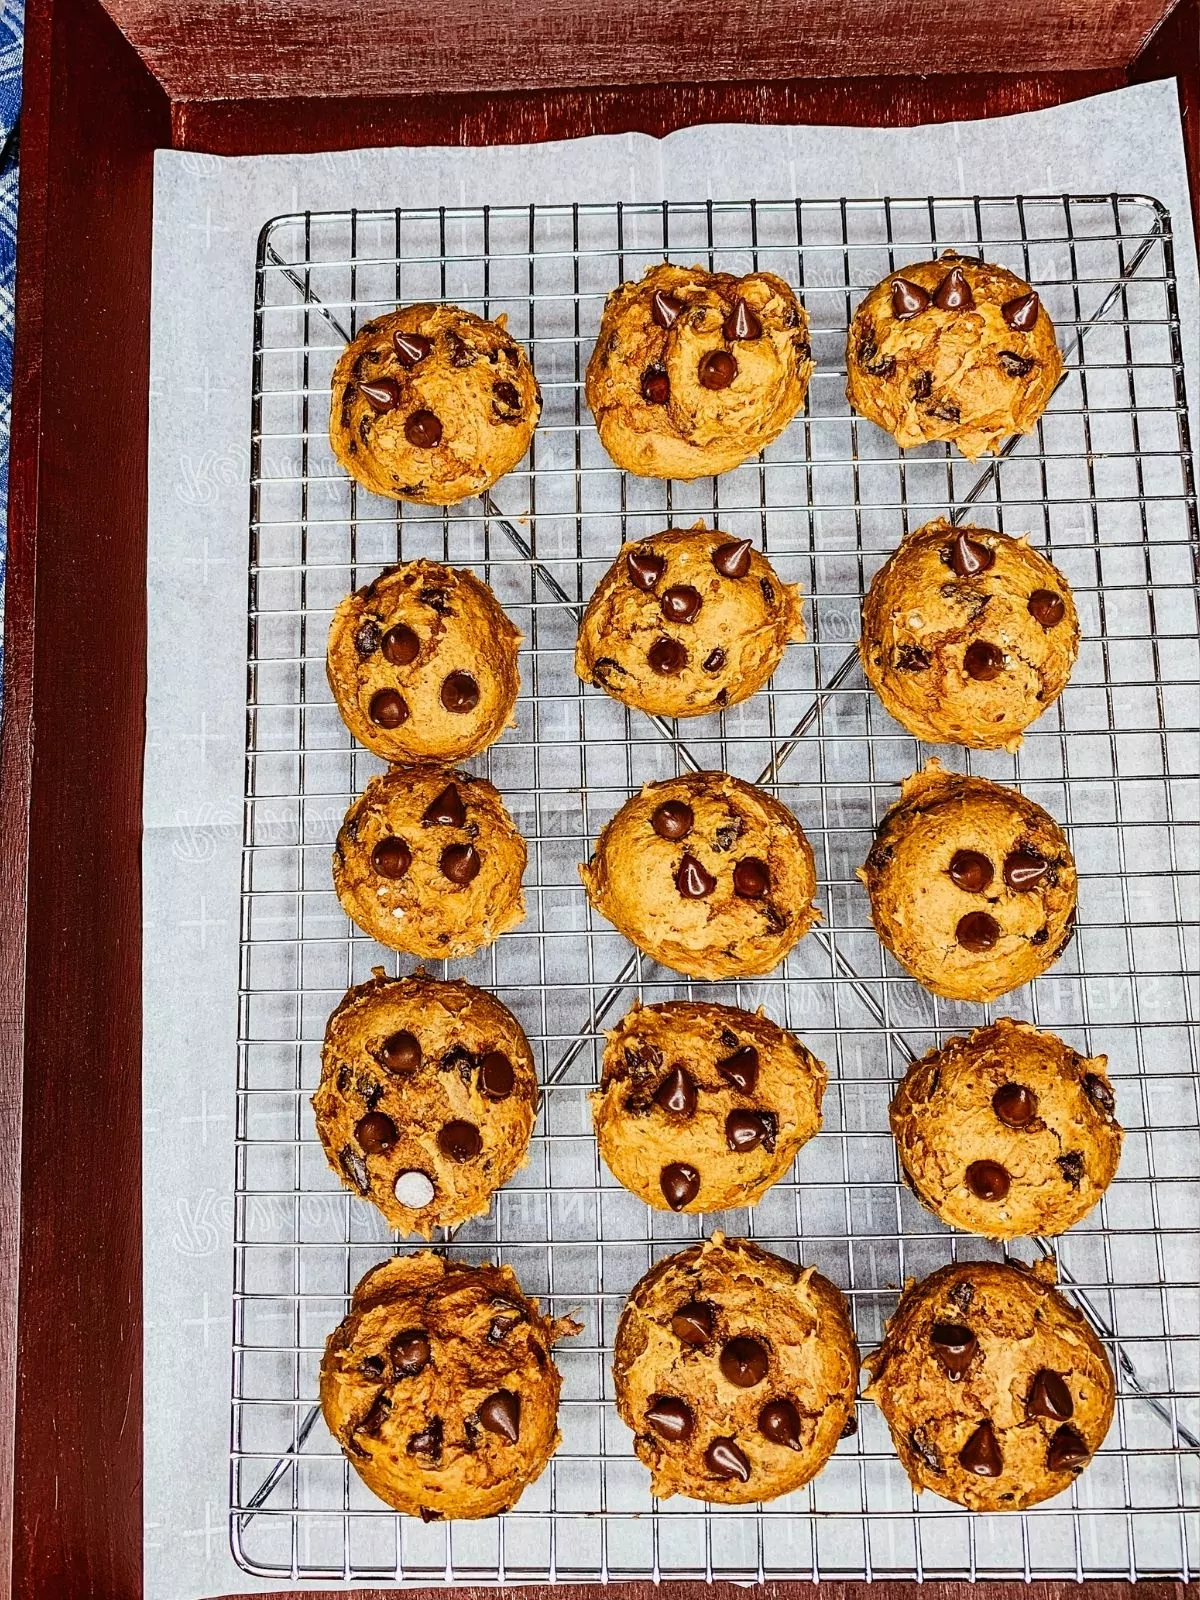 cookies made with spice cake mix and chocolate chips on cooling rack.